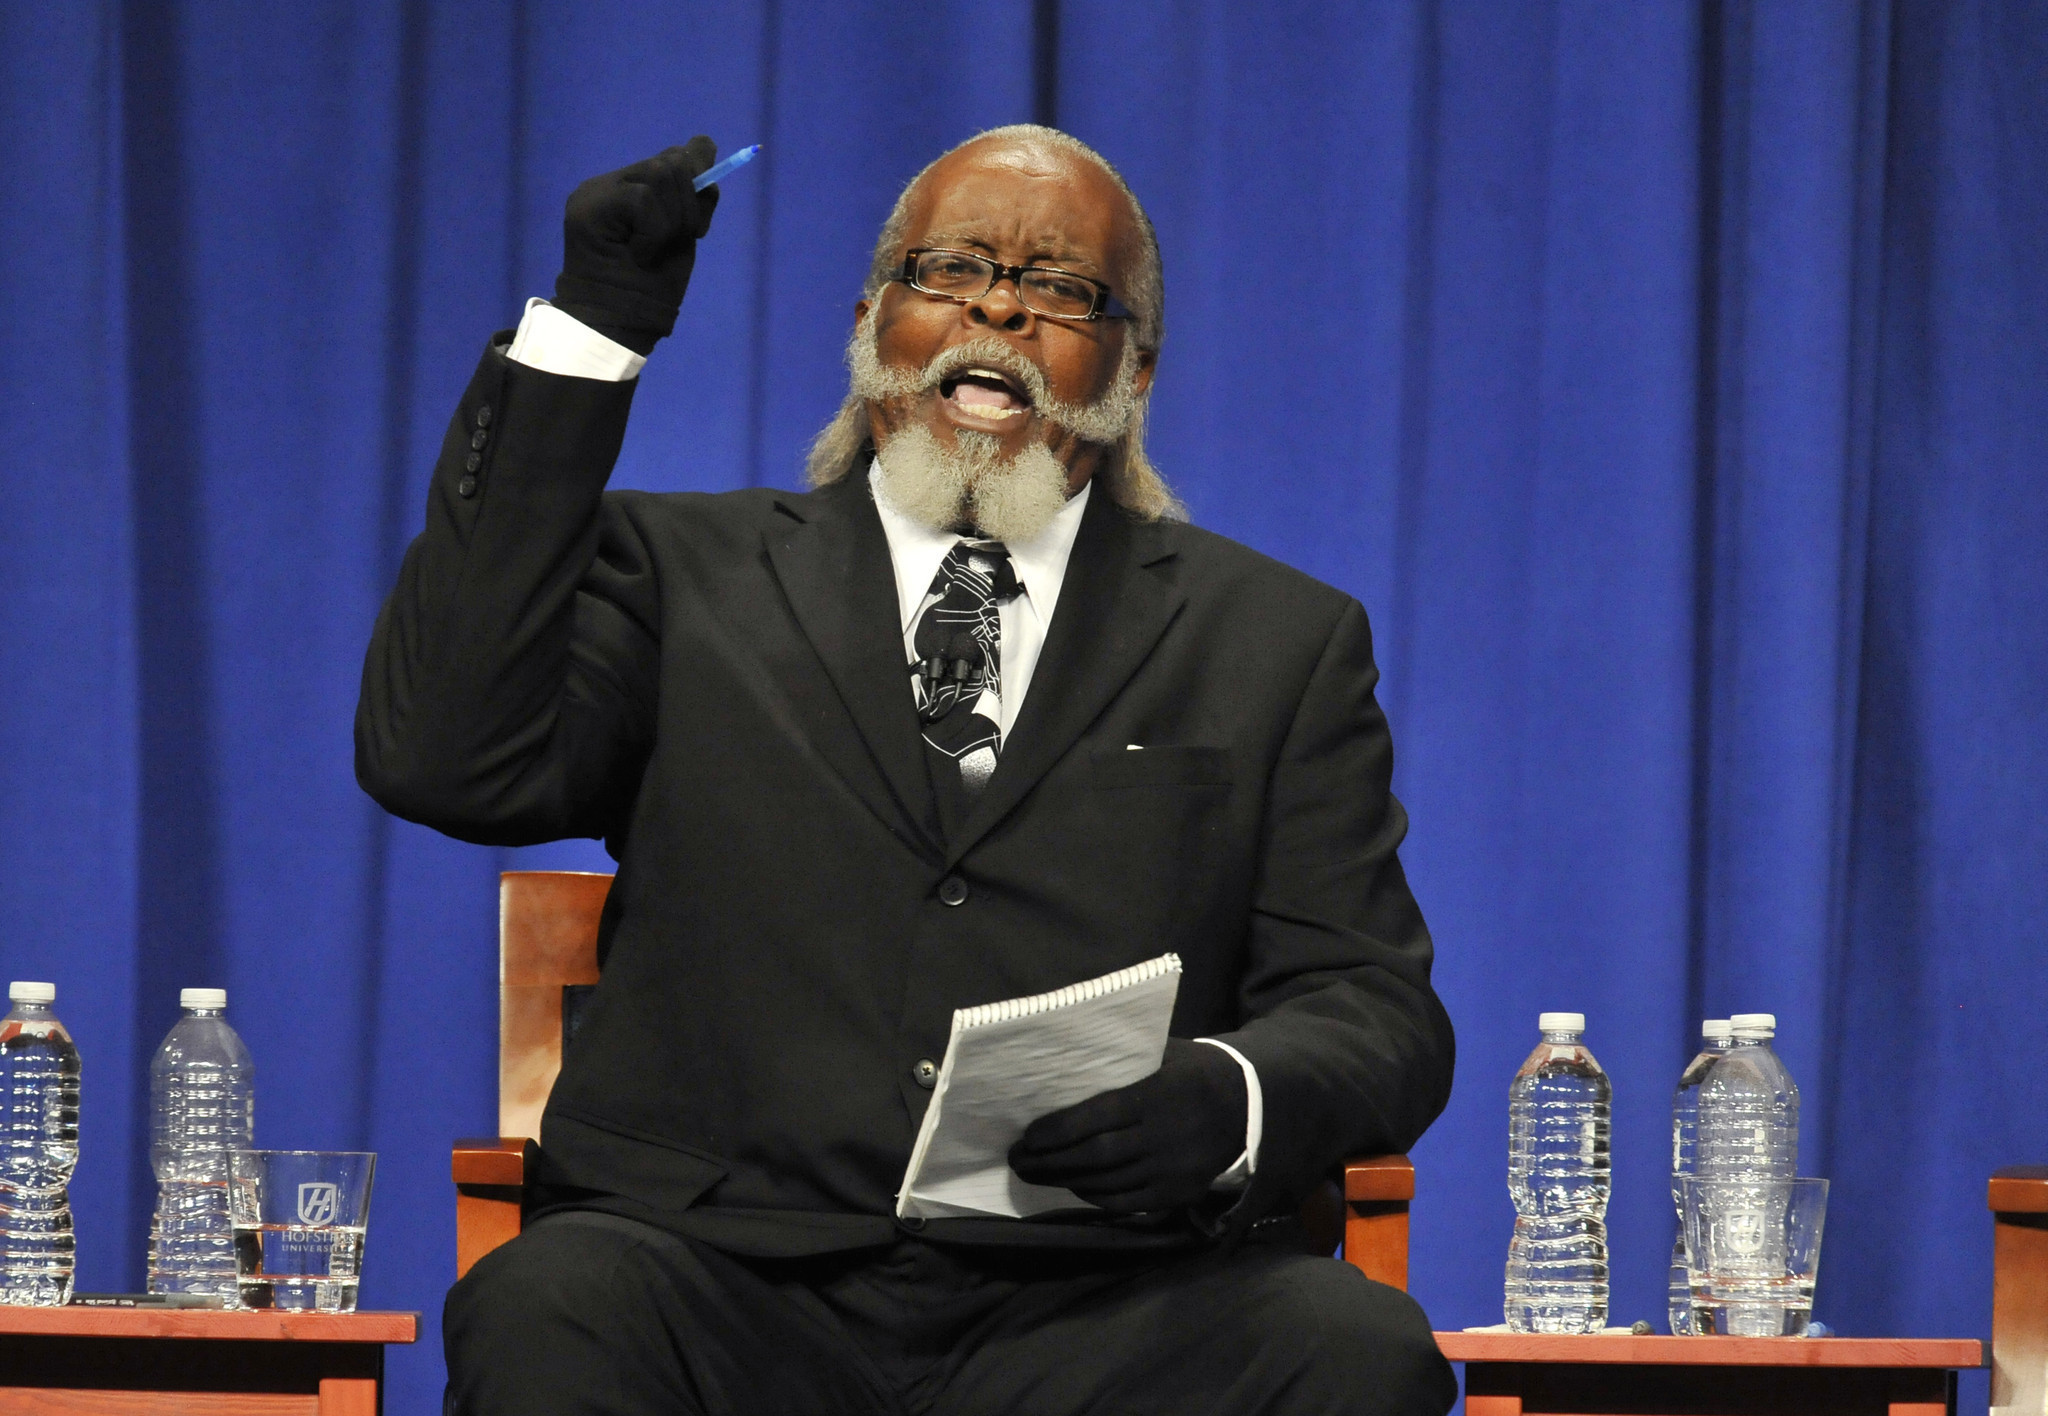 No "Rent is too damn high" memes have been featured yet. 